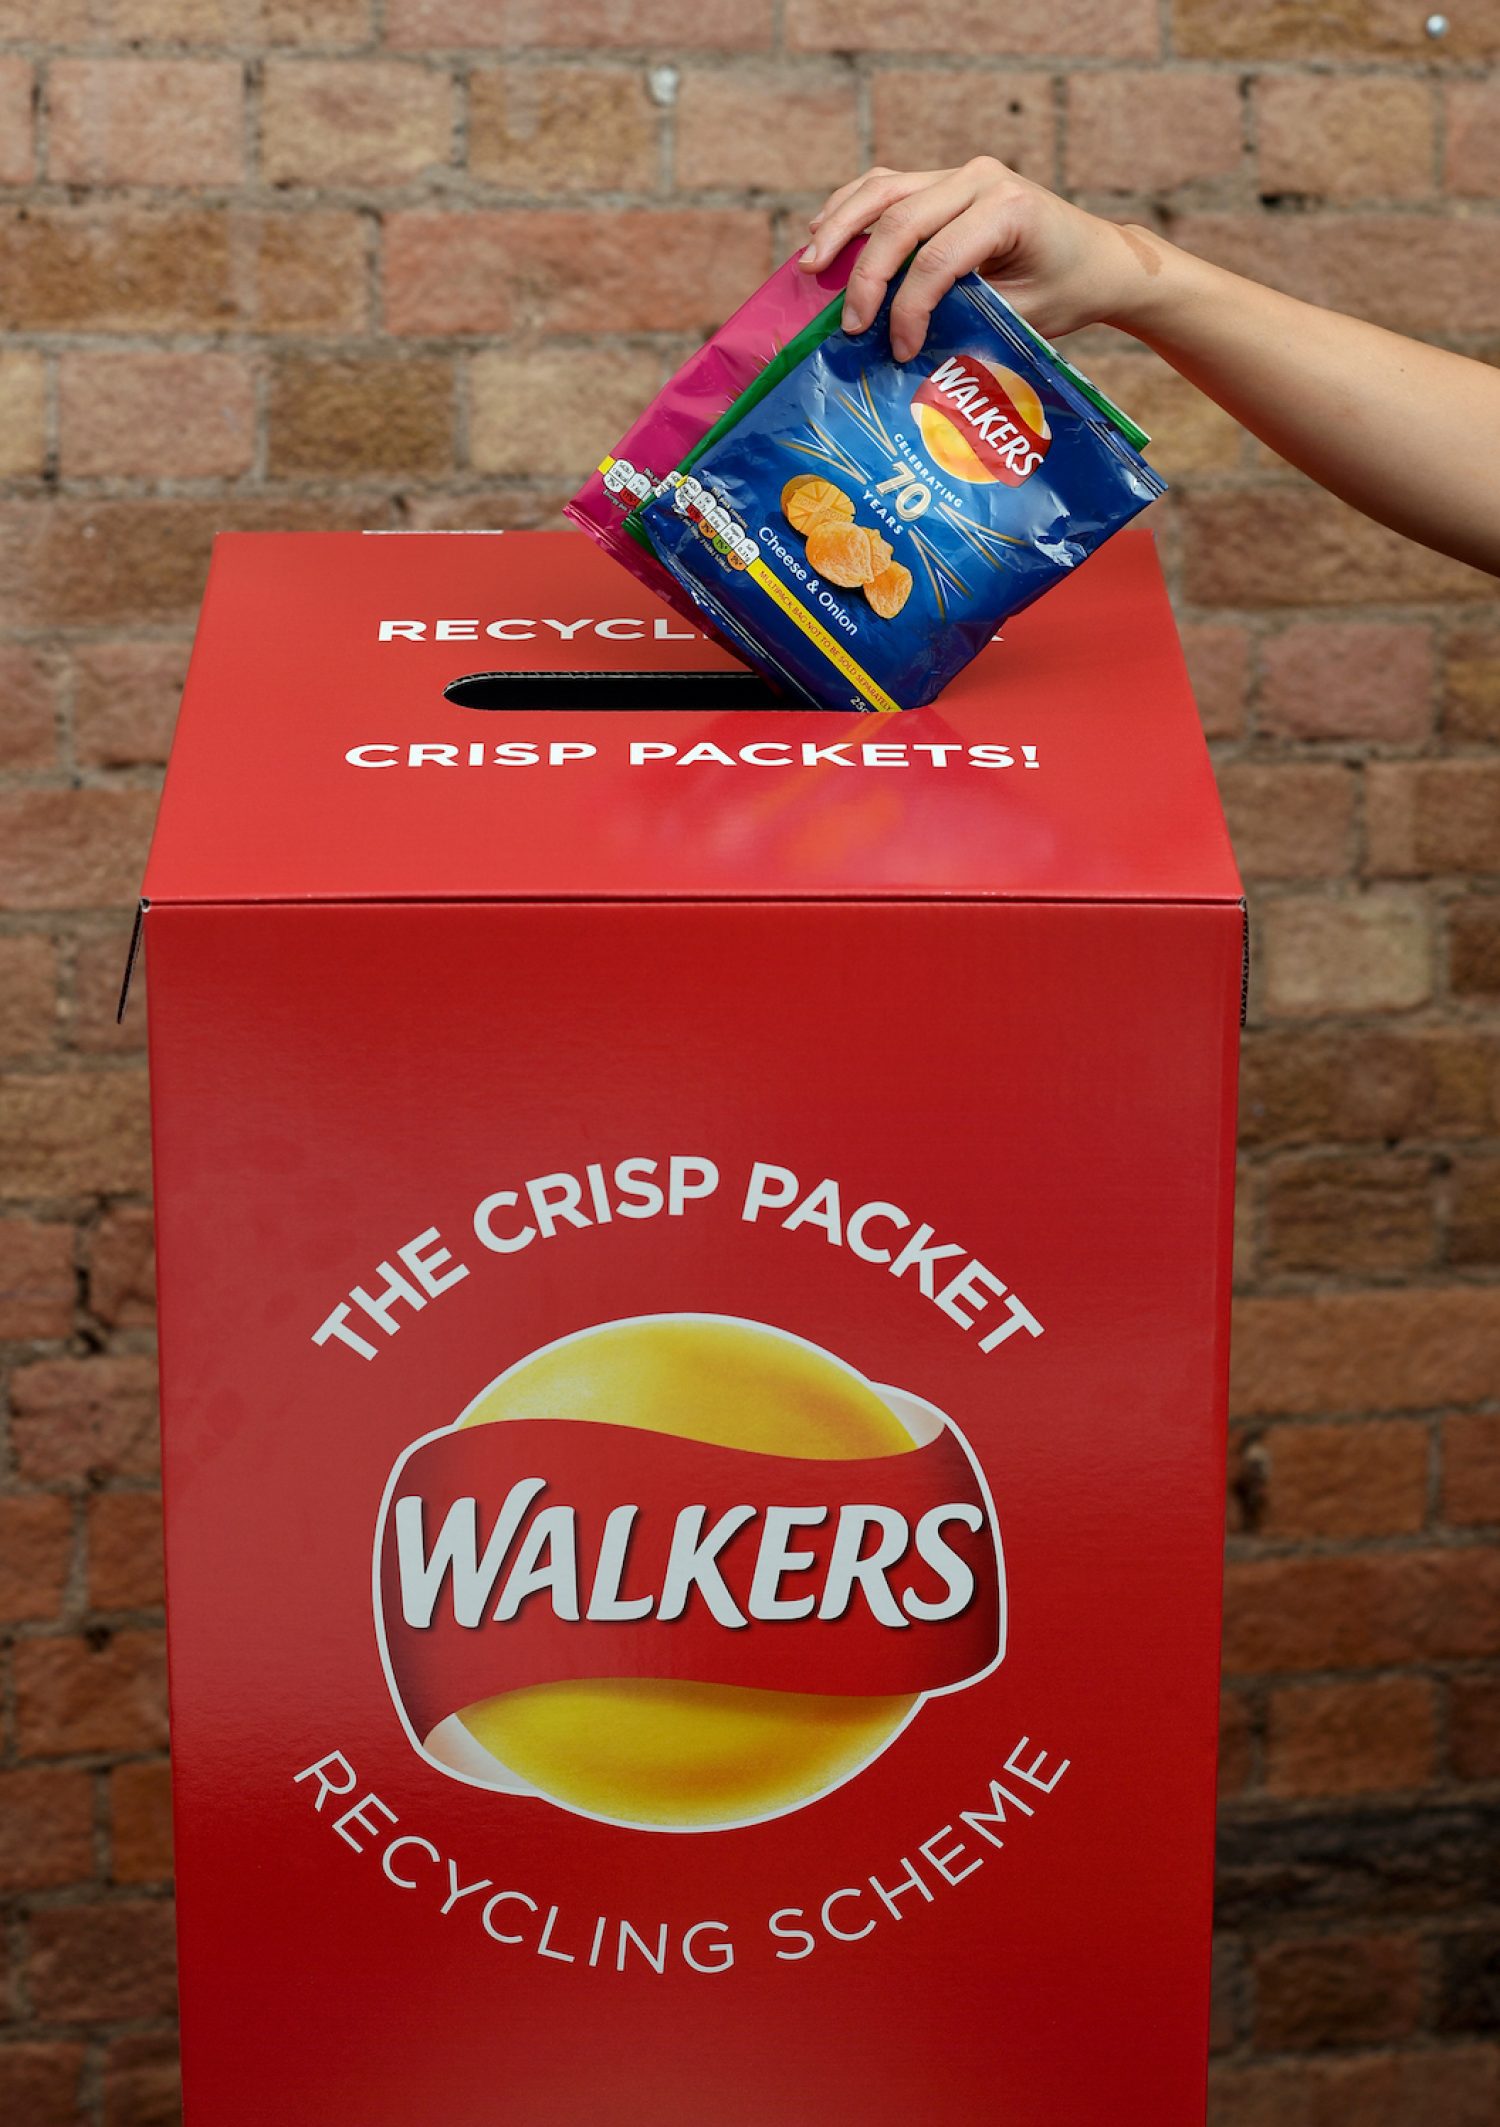 Recycle Your Crisp Packets!